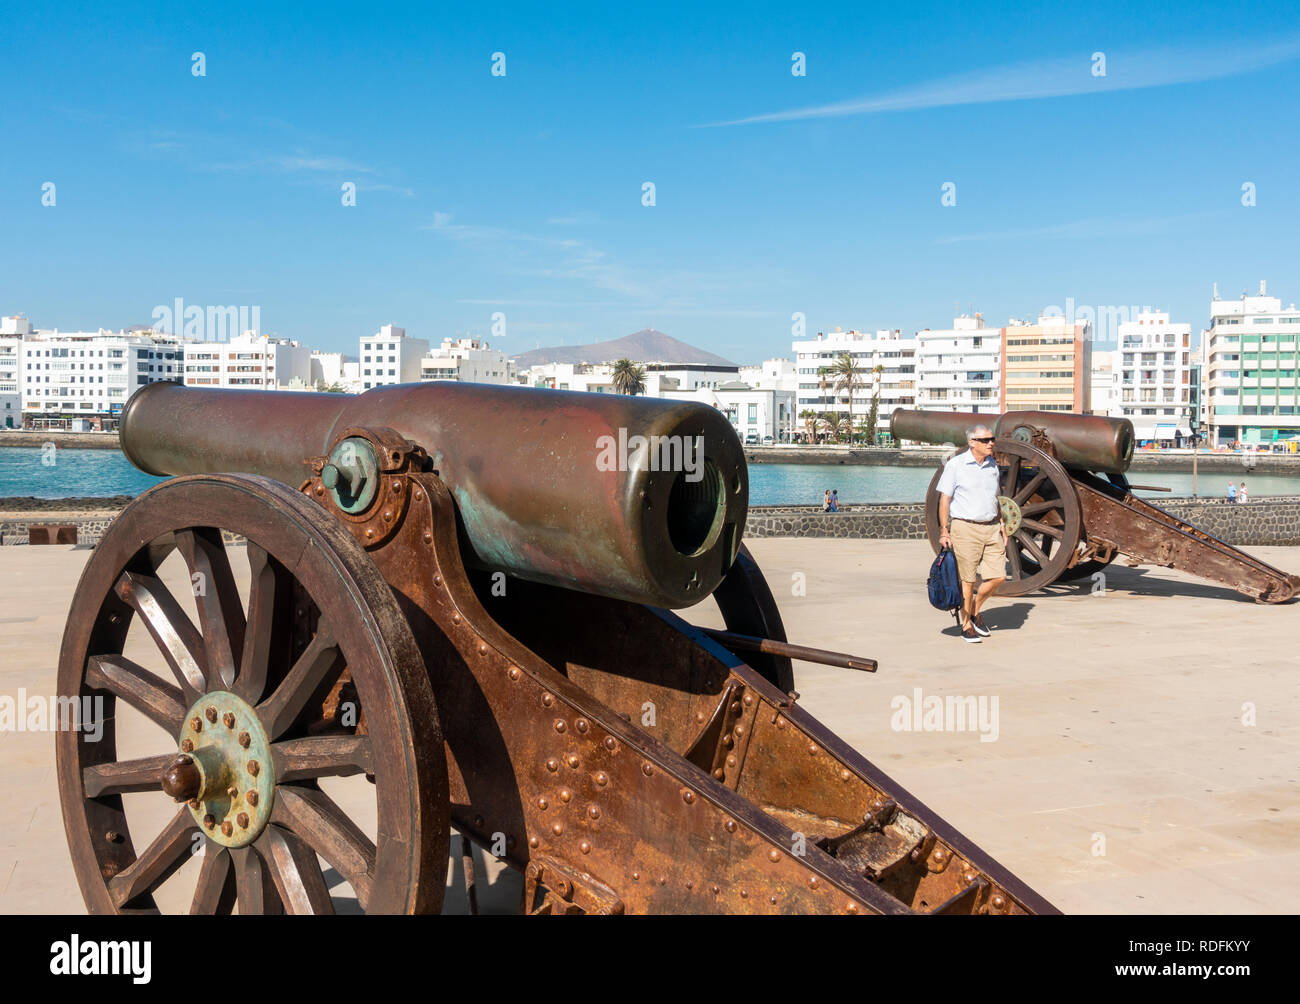 View from San Gabriel castle history museum in Arrecife on Lanzarote, Canary Islands, Spain Stock Photo